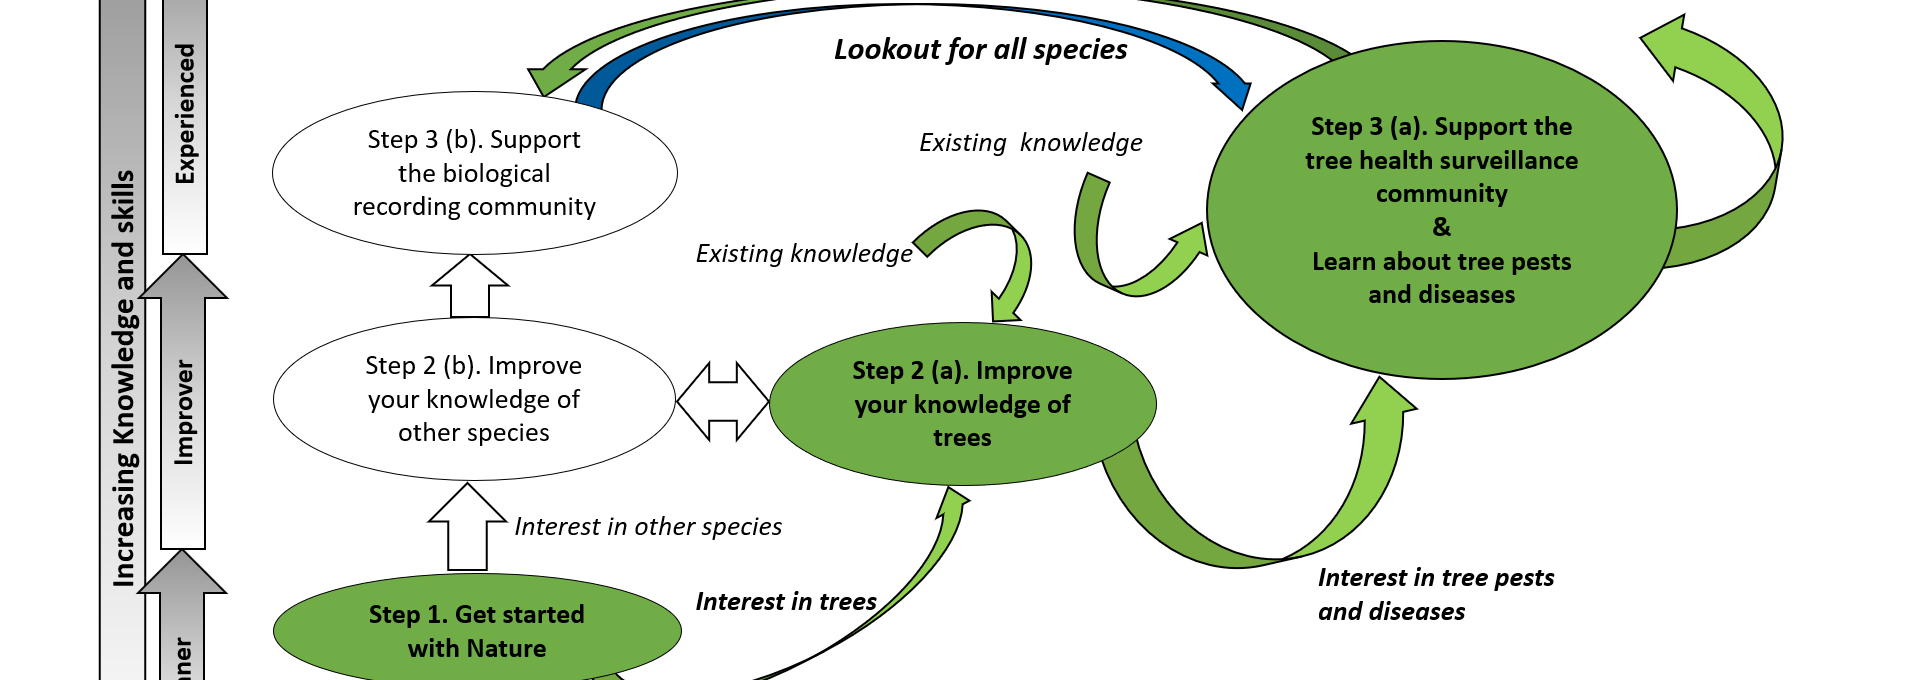 Diagram showing the Tree Health Learning Pathway